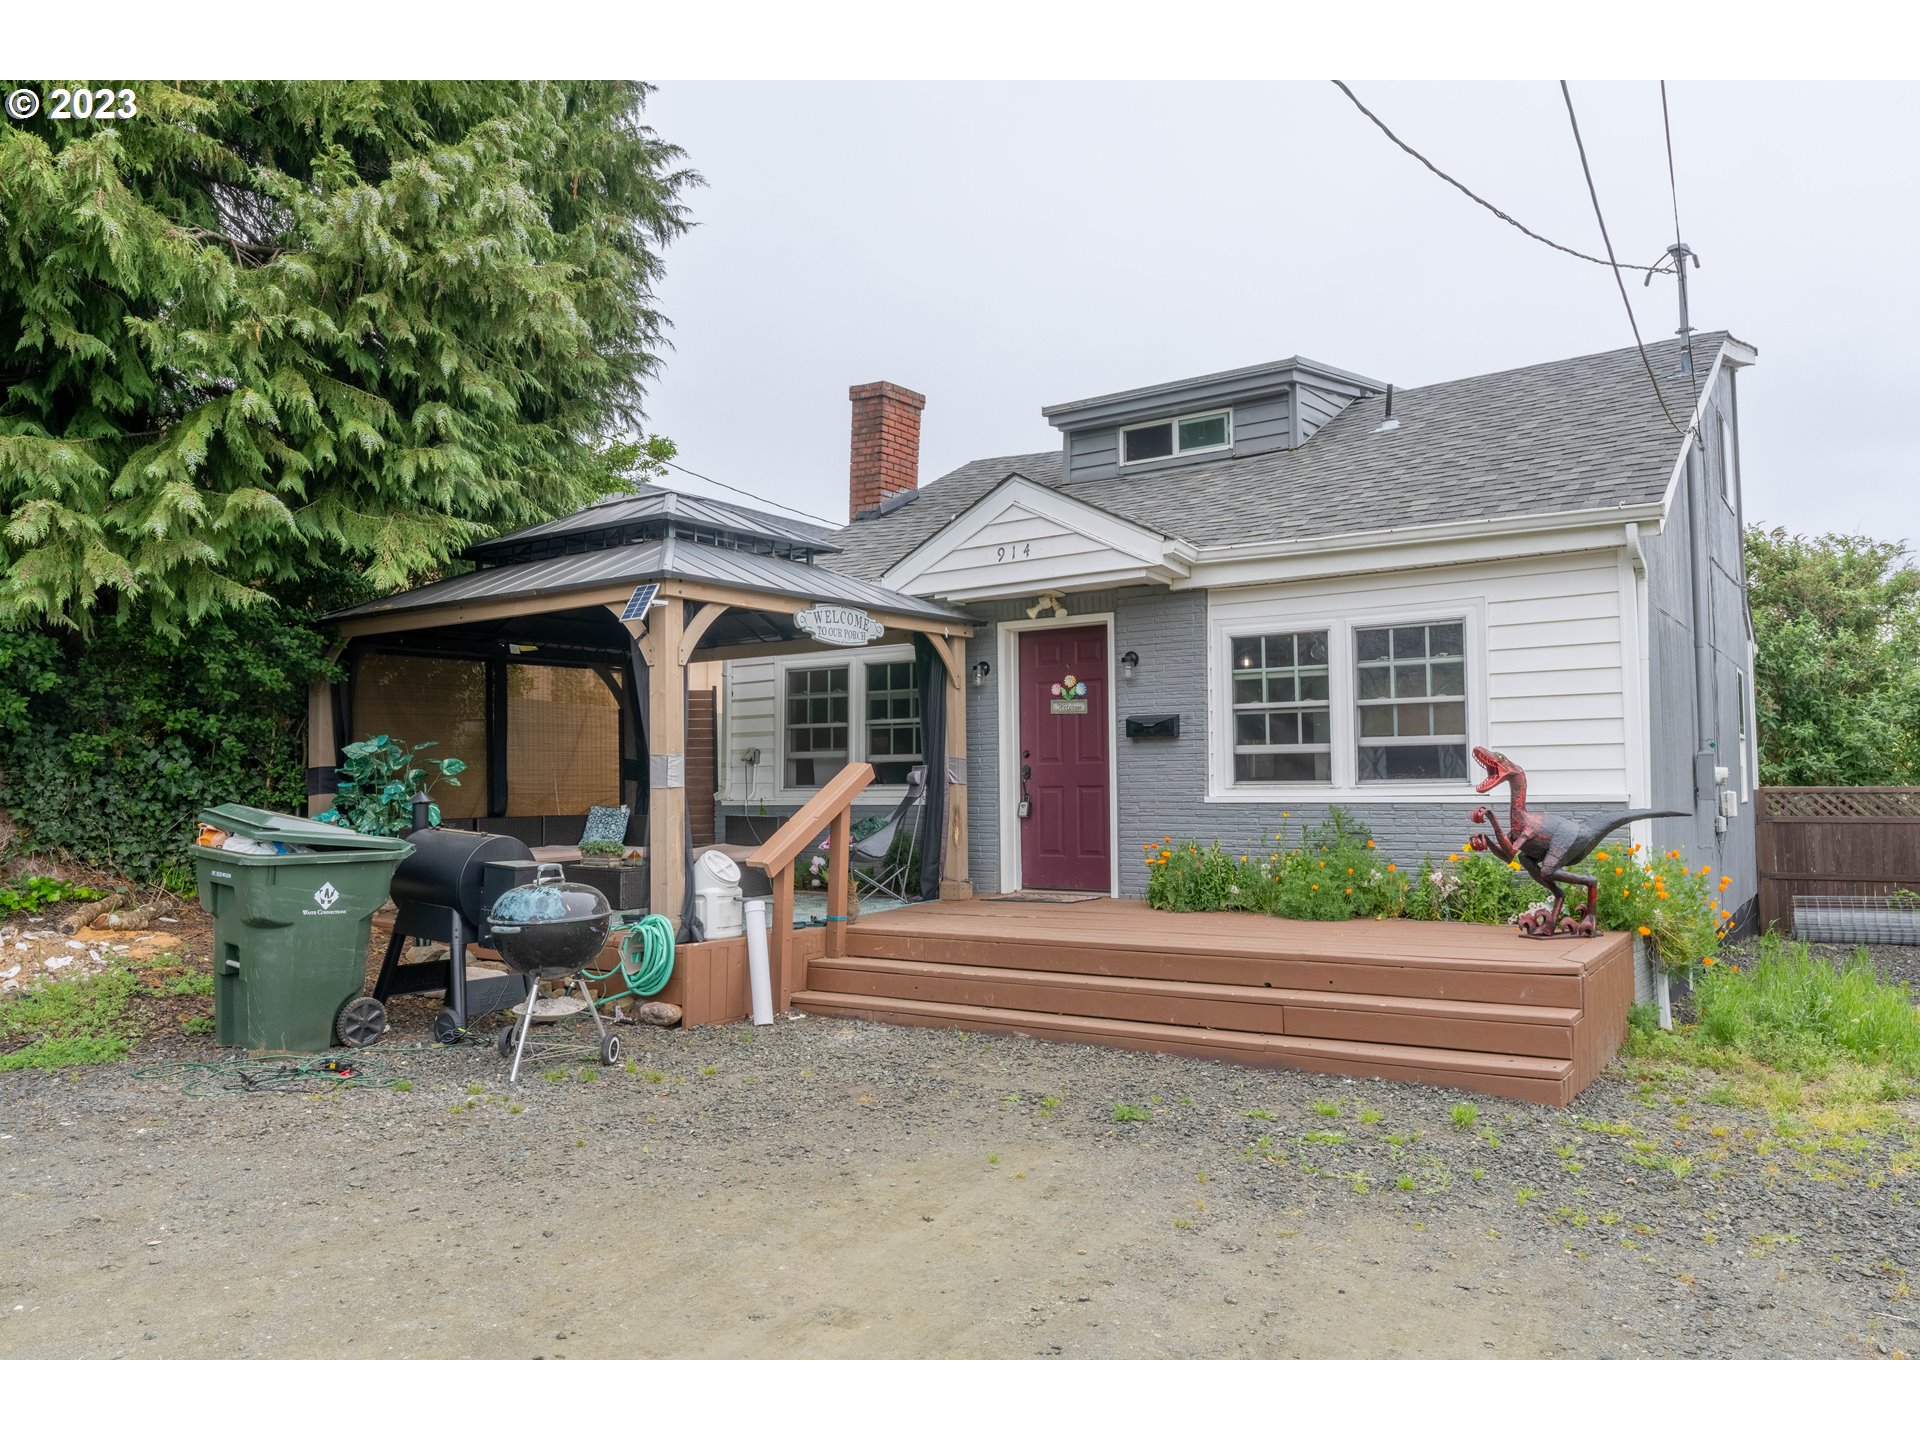 914 S 10TH ST, Coos Bay, OR 97420